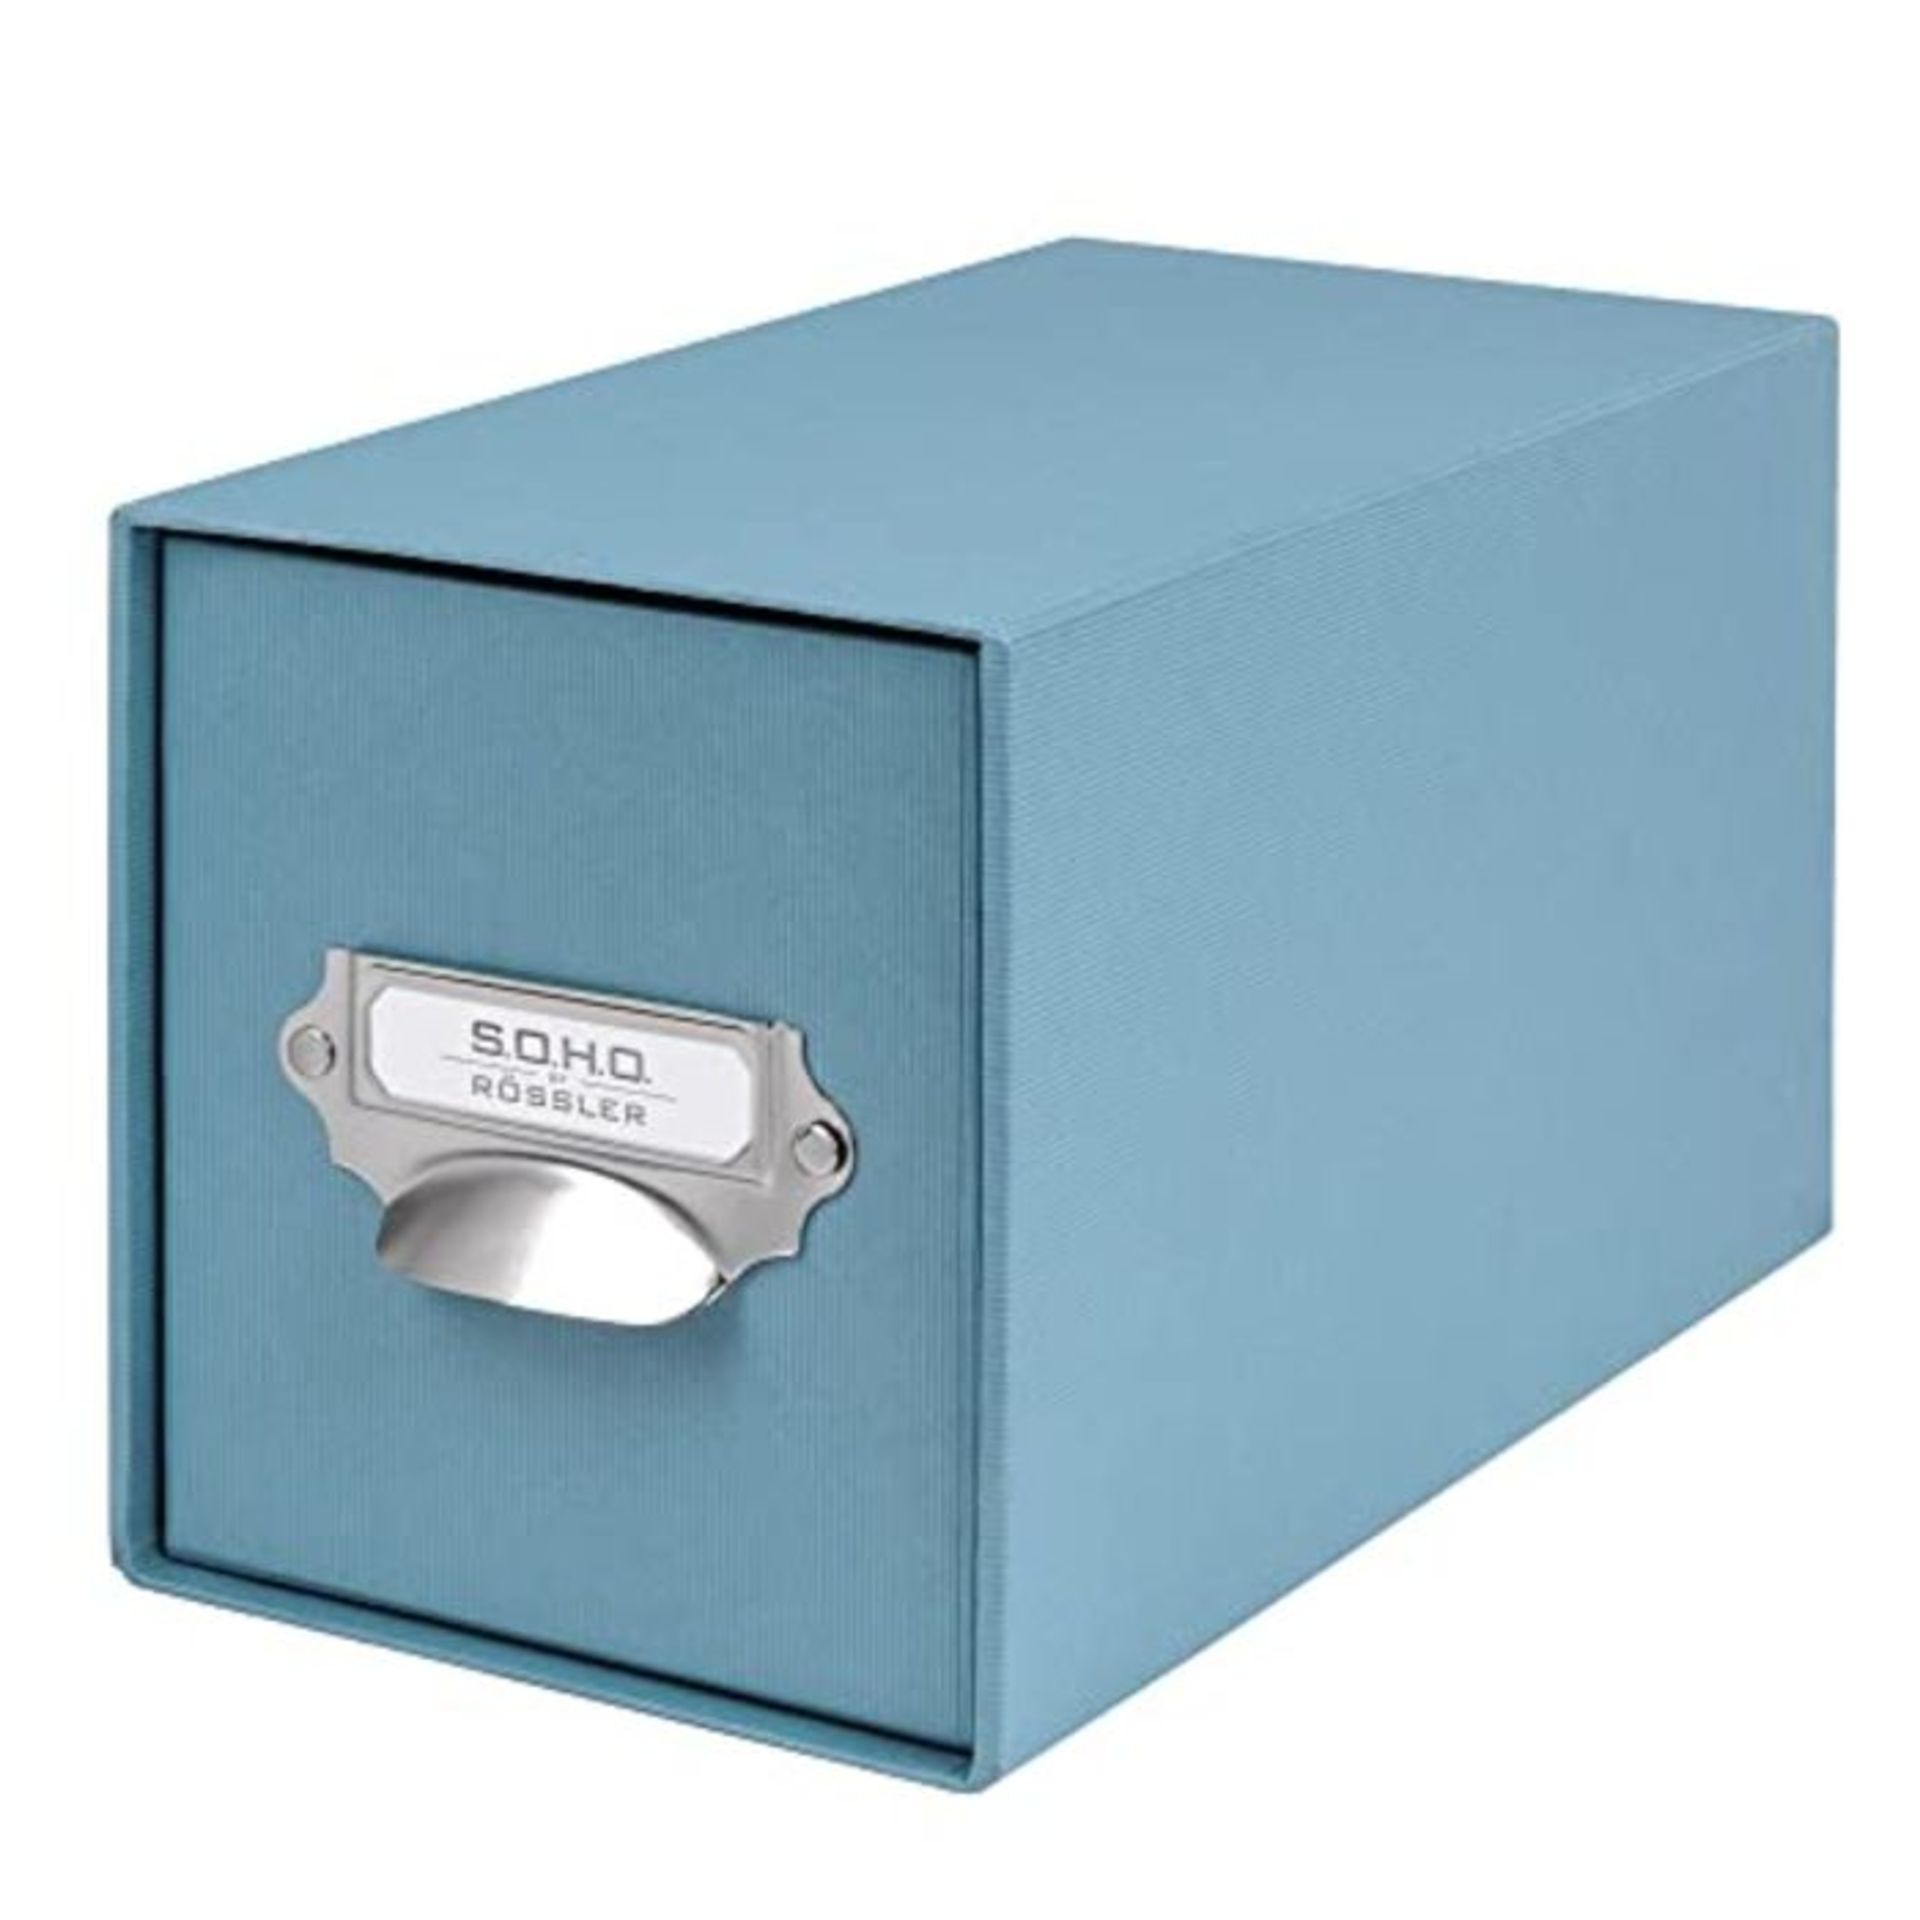 S.O.H.O. 1327452150 Denim CD Box with Handle and Index Holder